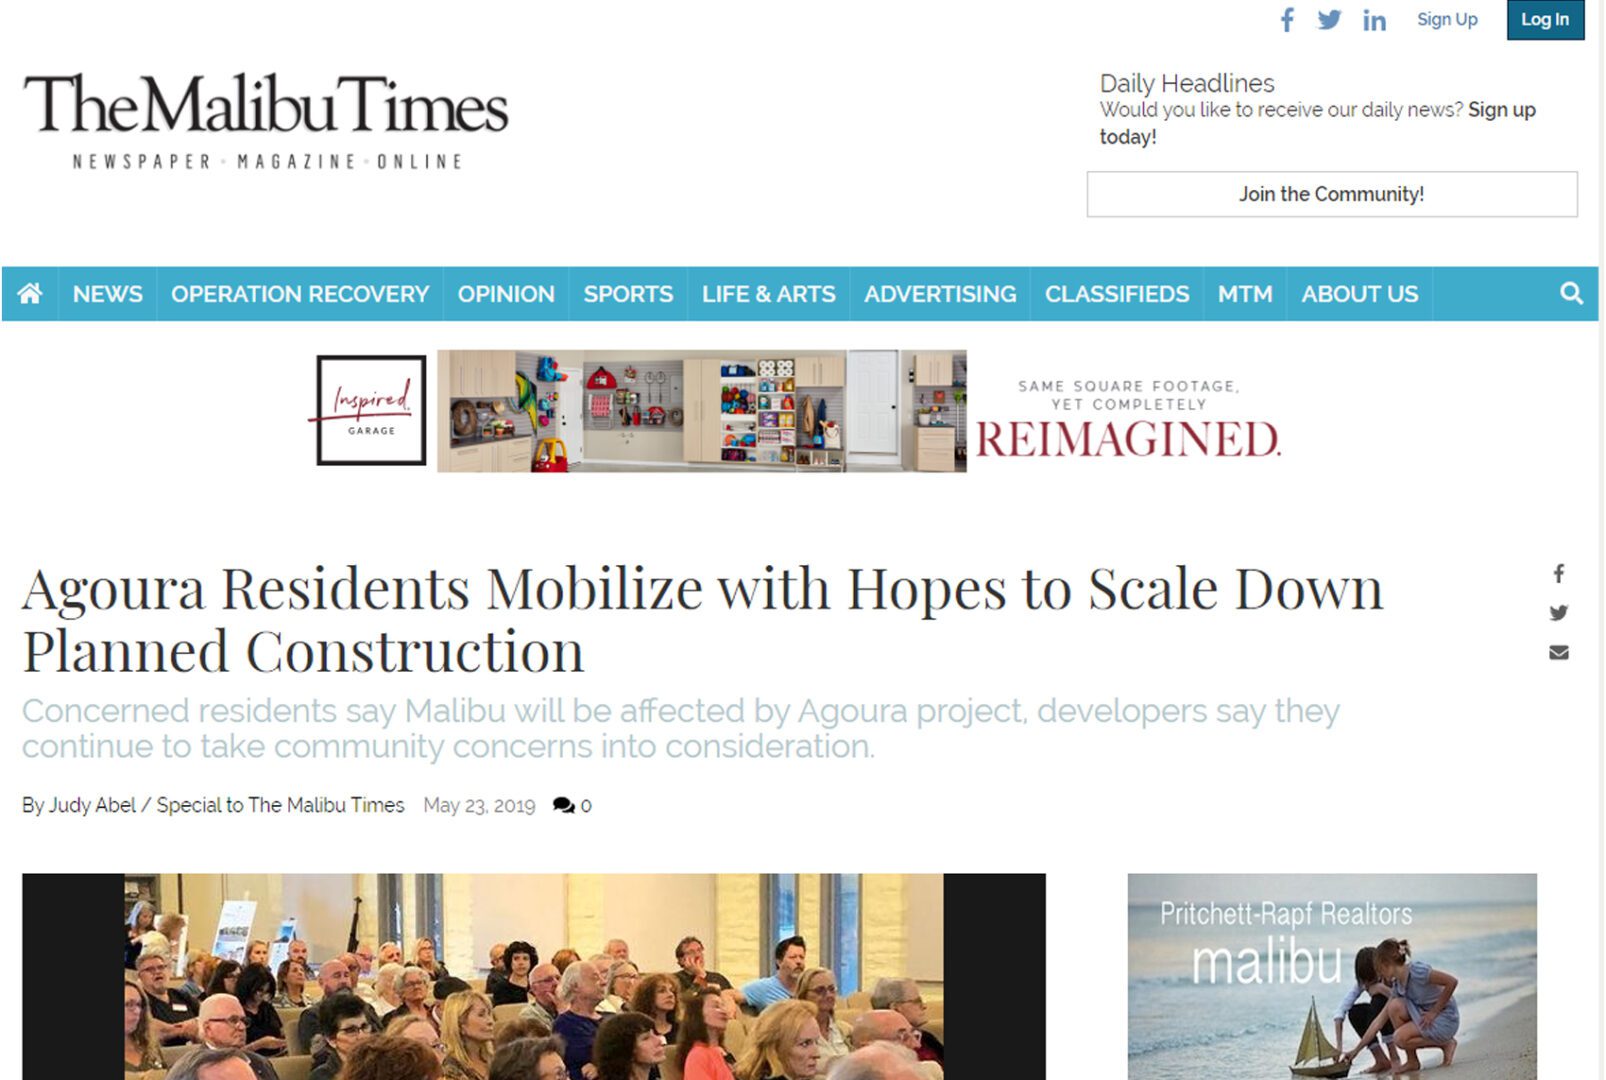 Agoura Residents Mobilize with Hopes to Scale Down Planned Construction